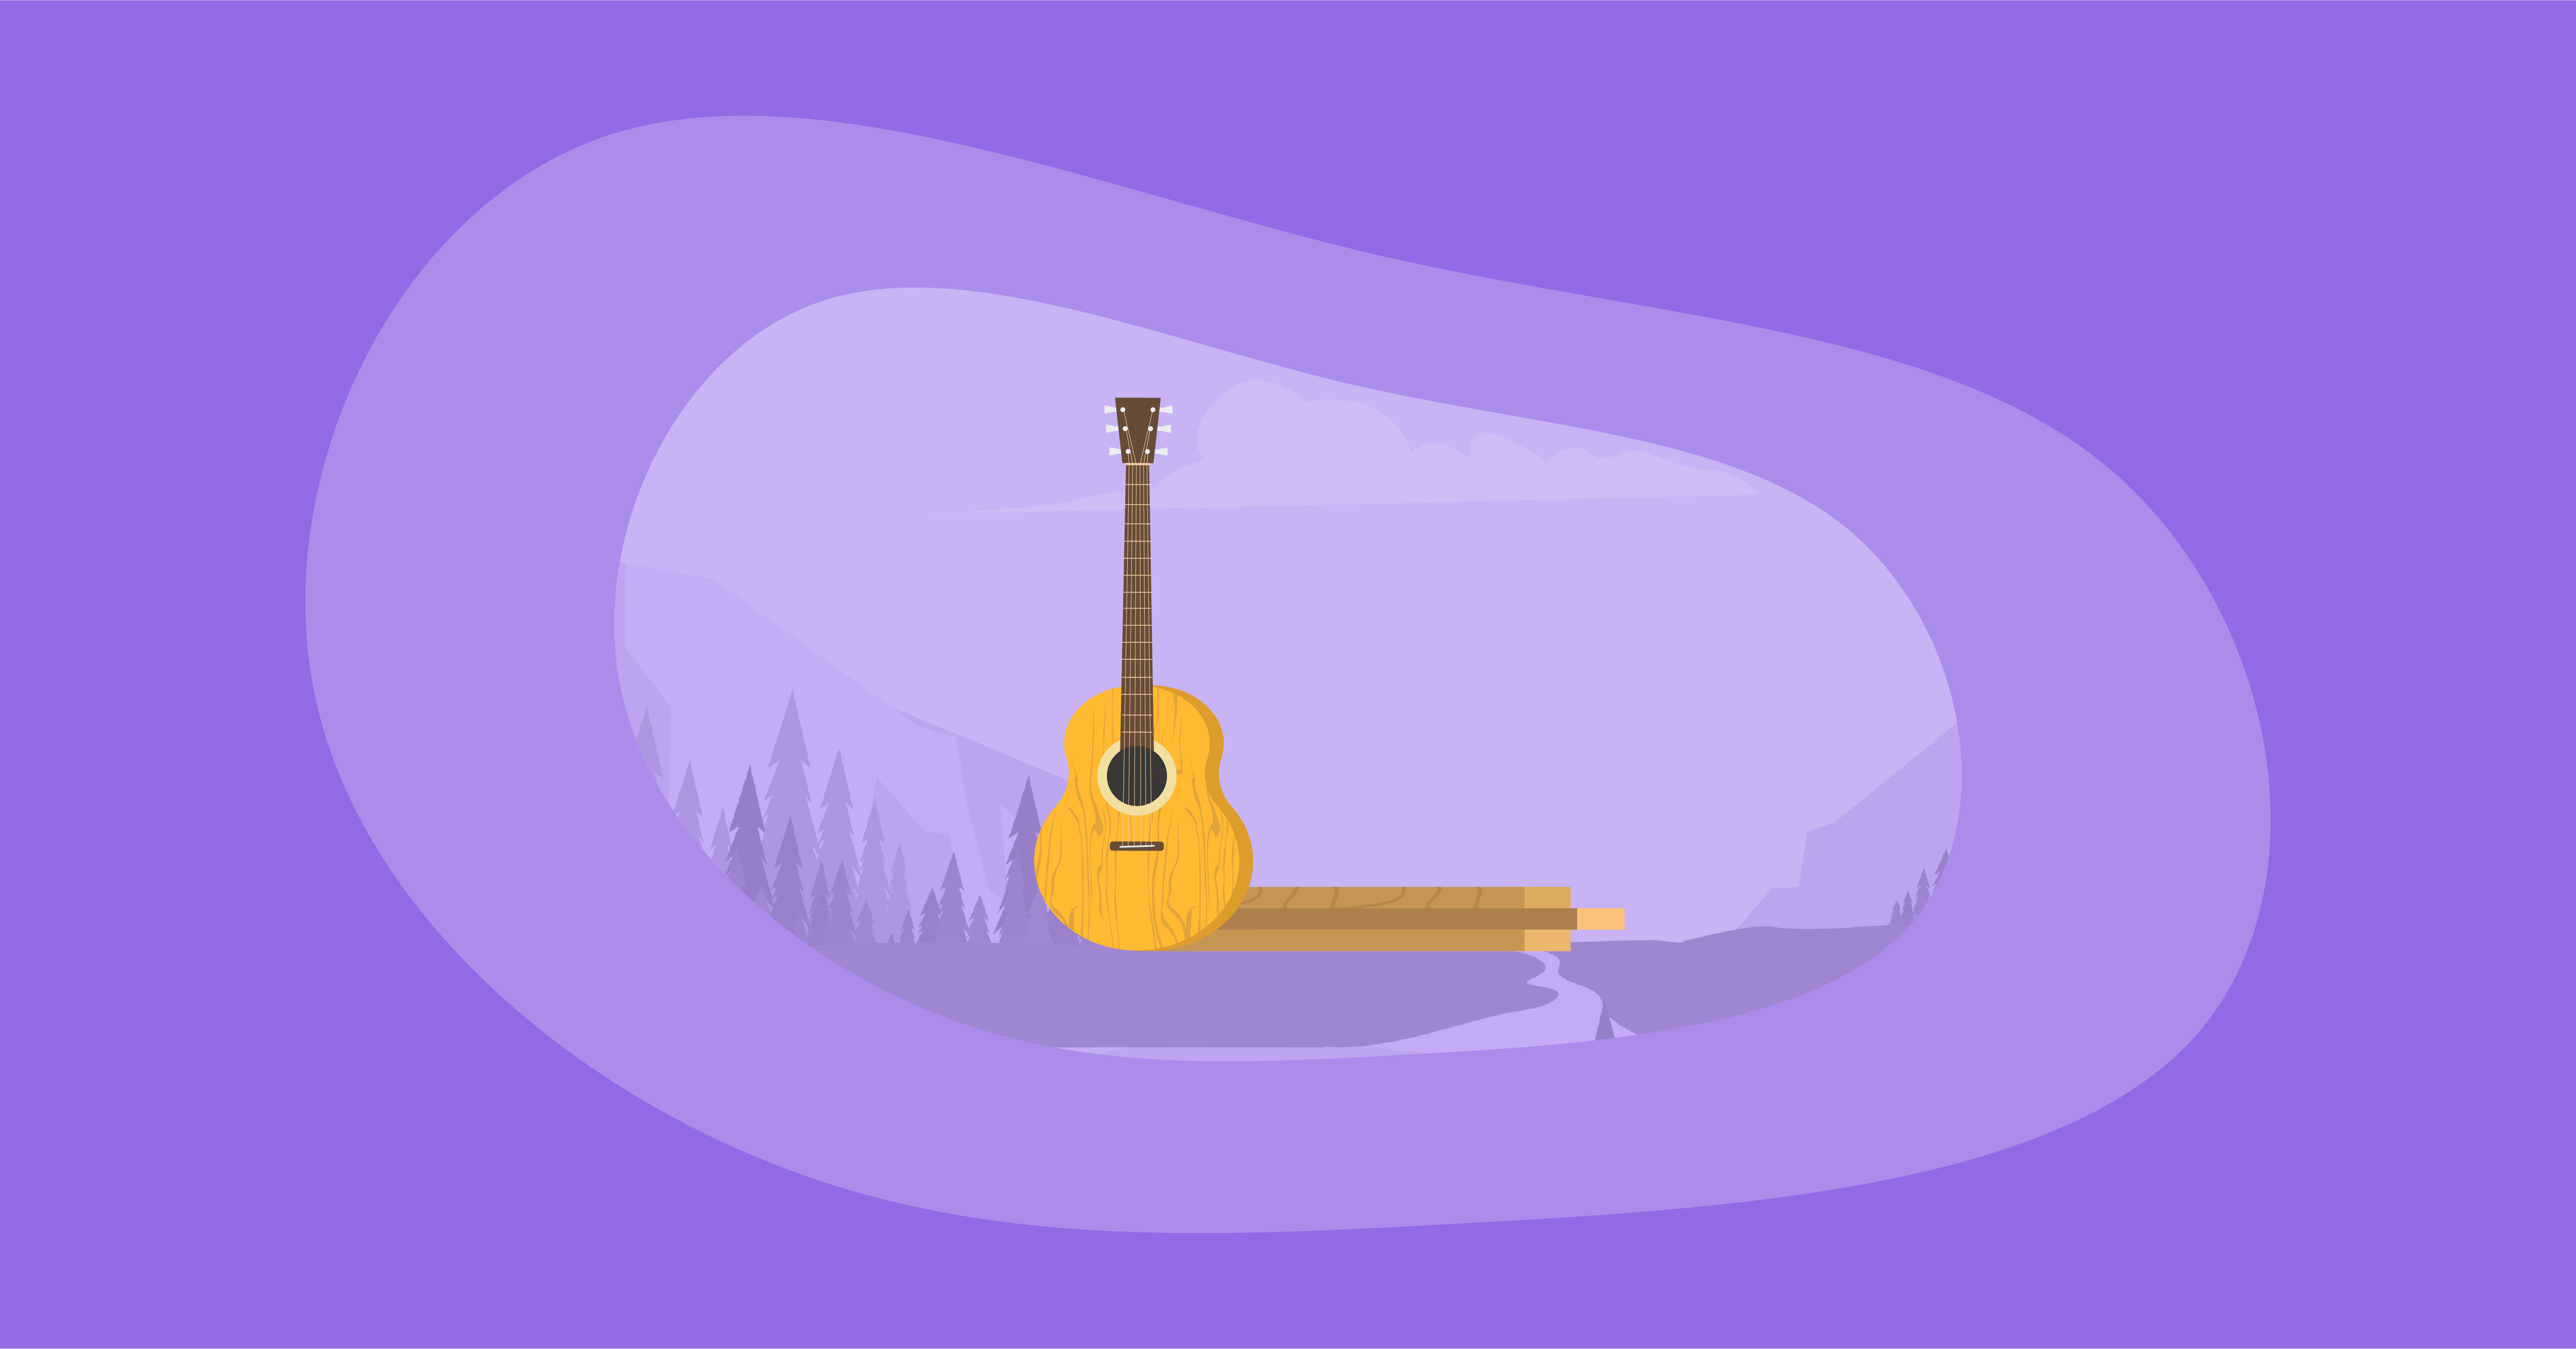 Illustration of tonewood and a guitar